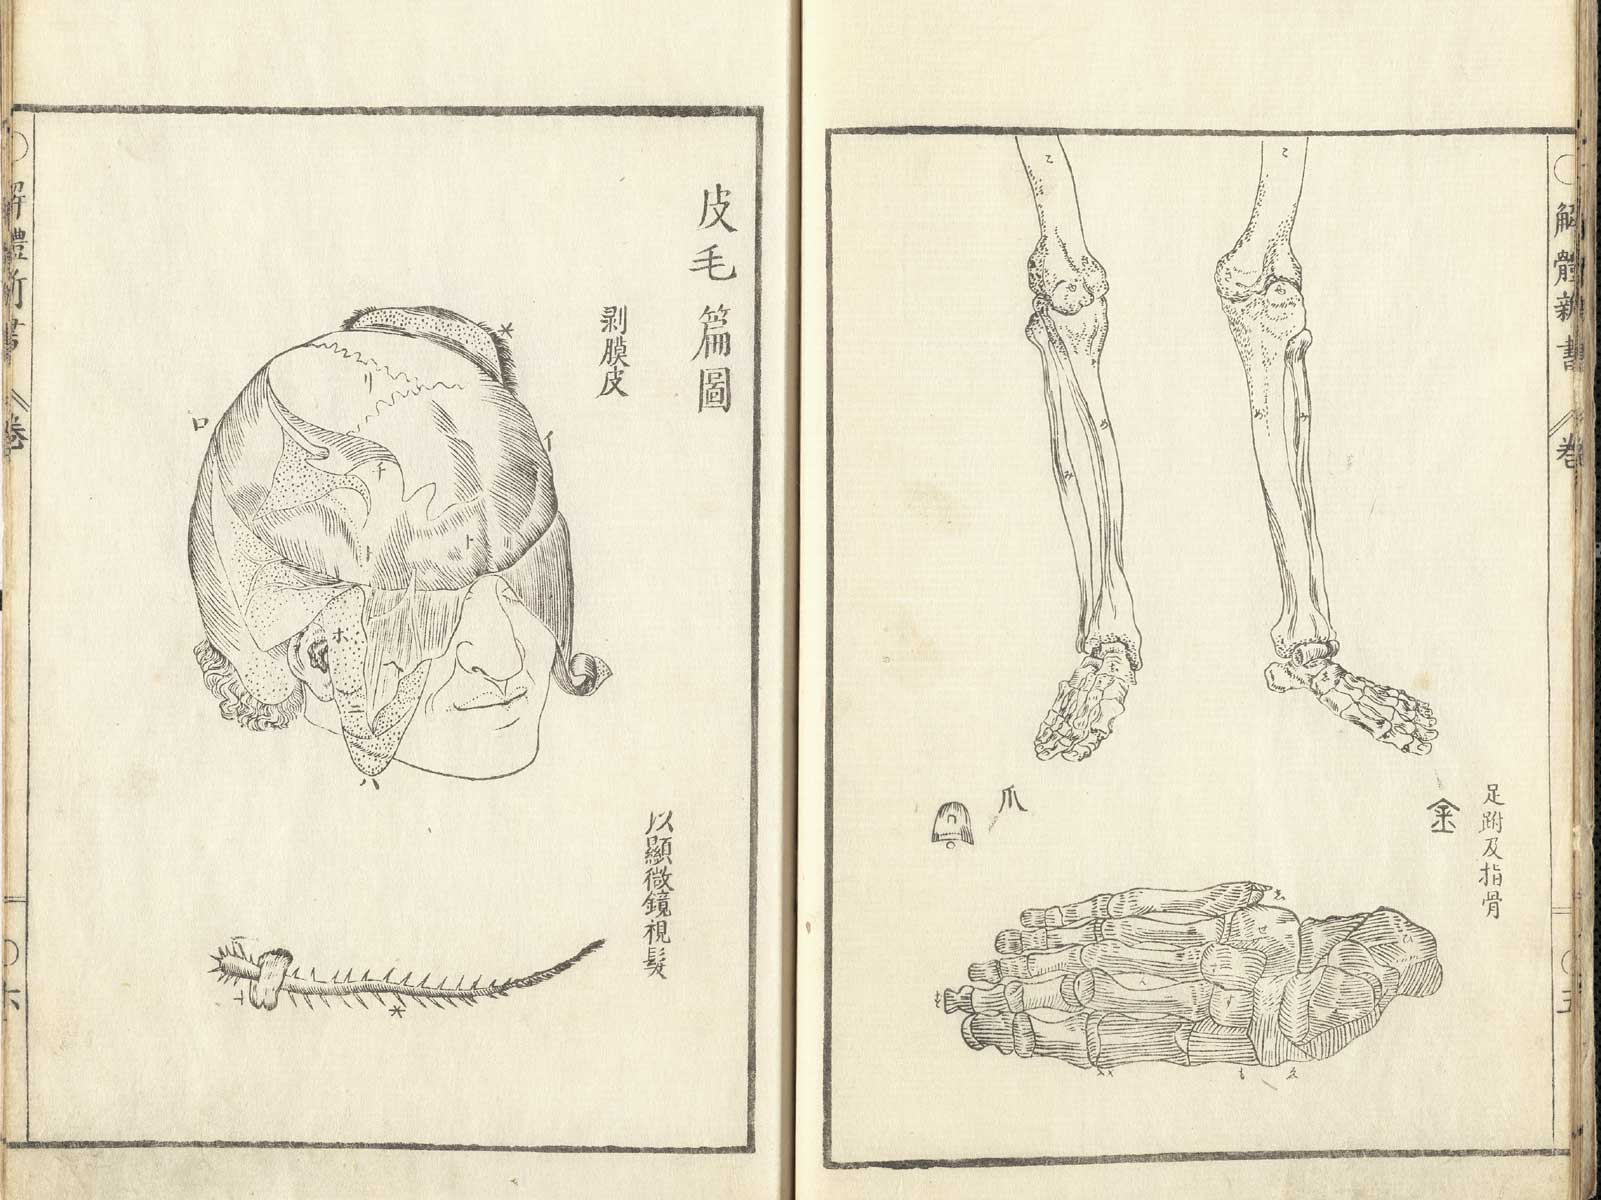 Pages 5 and 6 of Johann Adam Kulmus' Kaitai shinsho. On page 5 is an illustration of the leg bones of a skeleton from mid-thigh to foot and at the bottom is a more detailed illustration of the right foot. On page 6 is an illustration of a head in right frontal profile with the brain exposed.